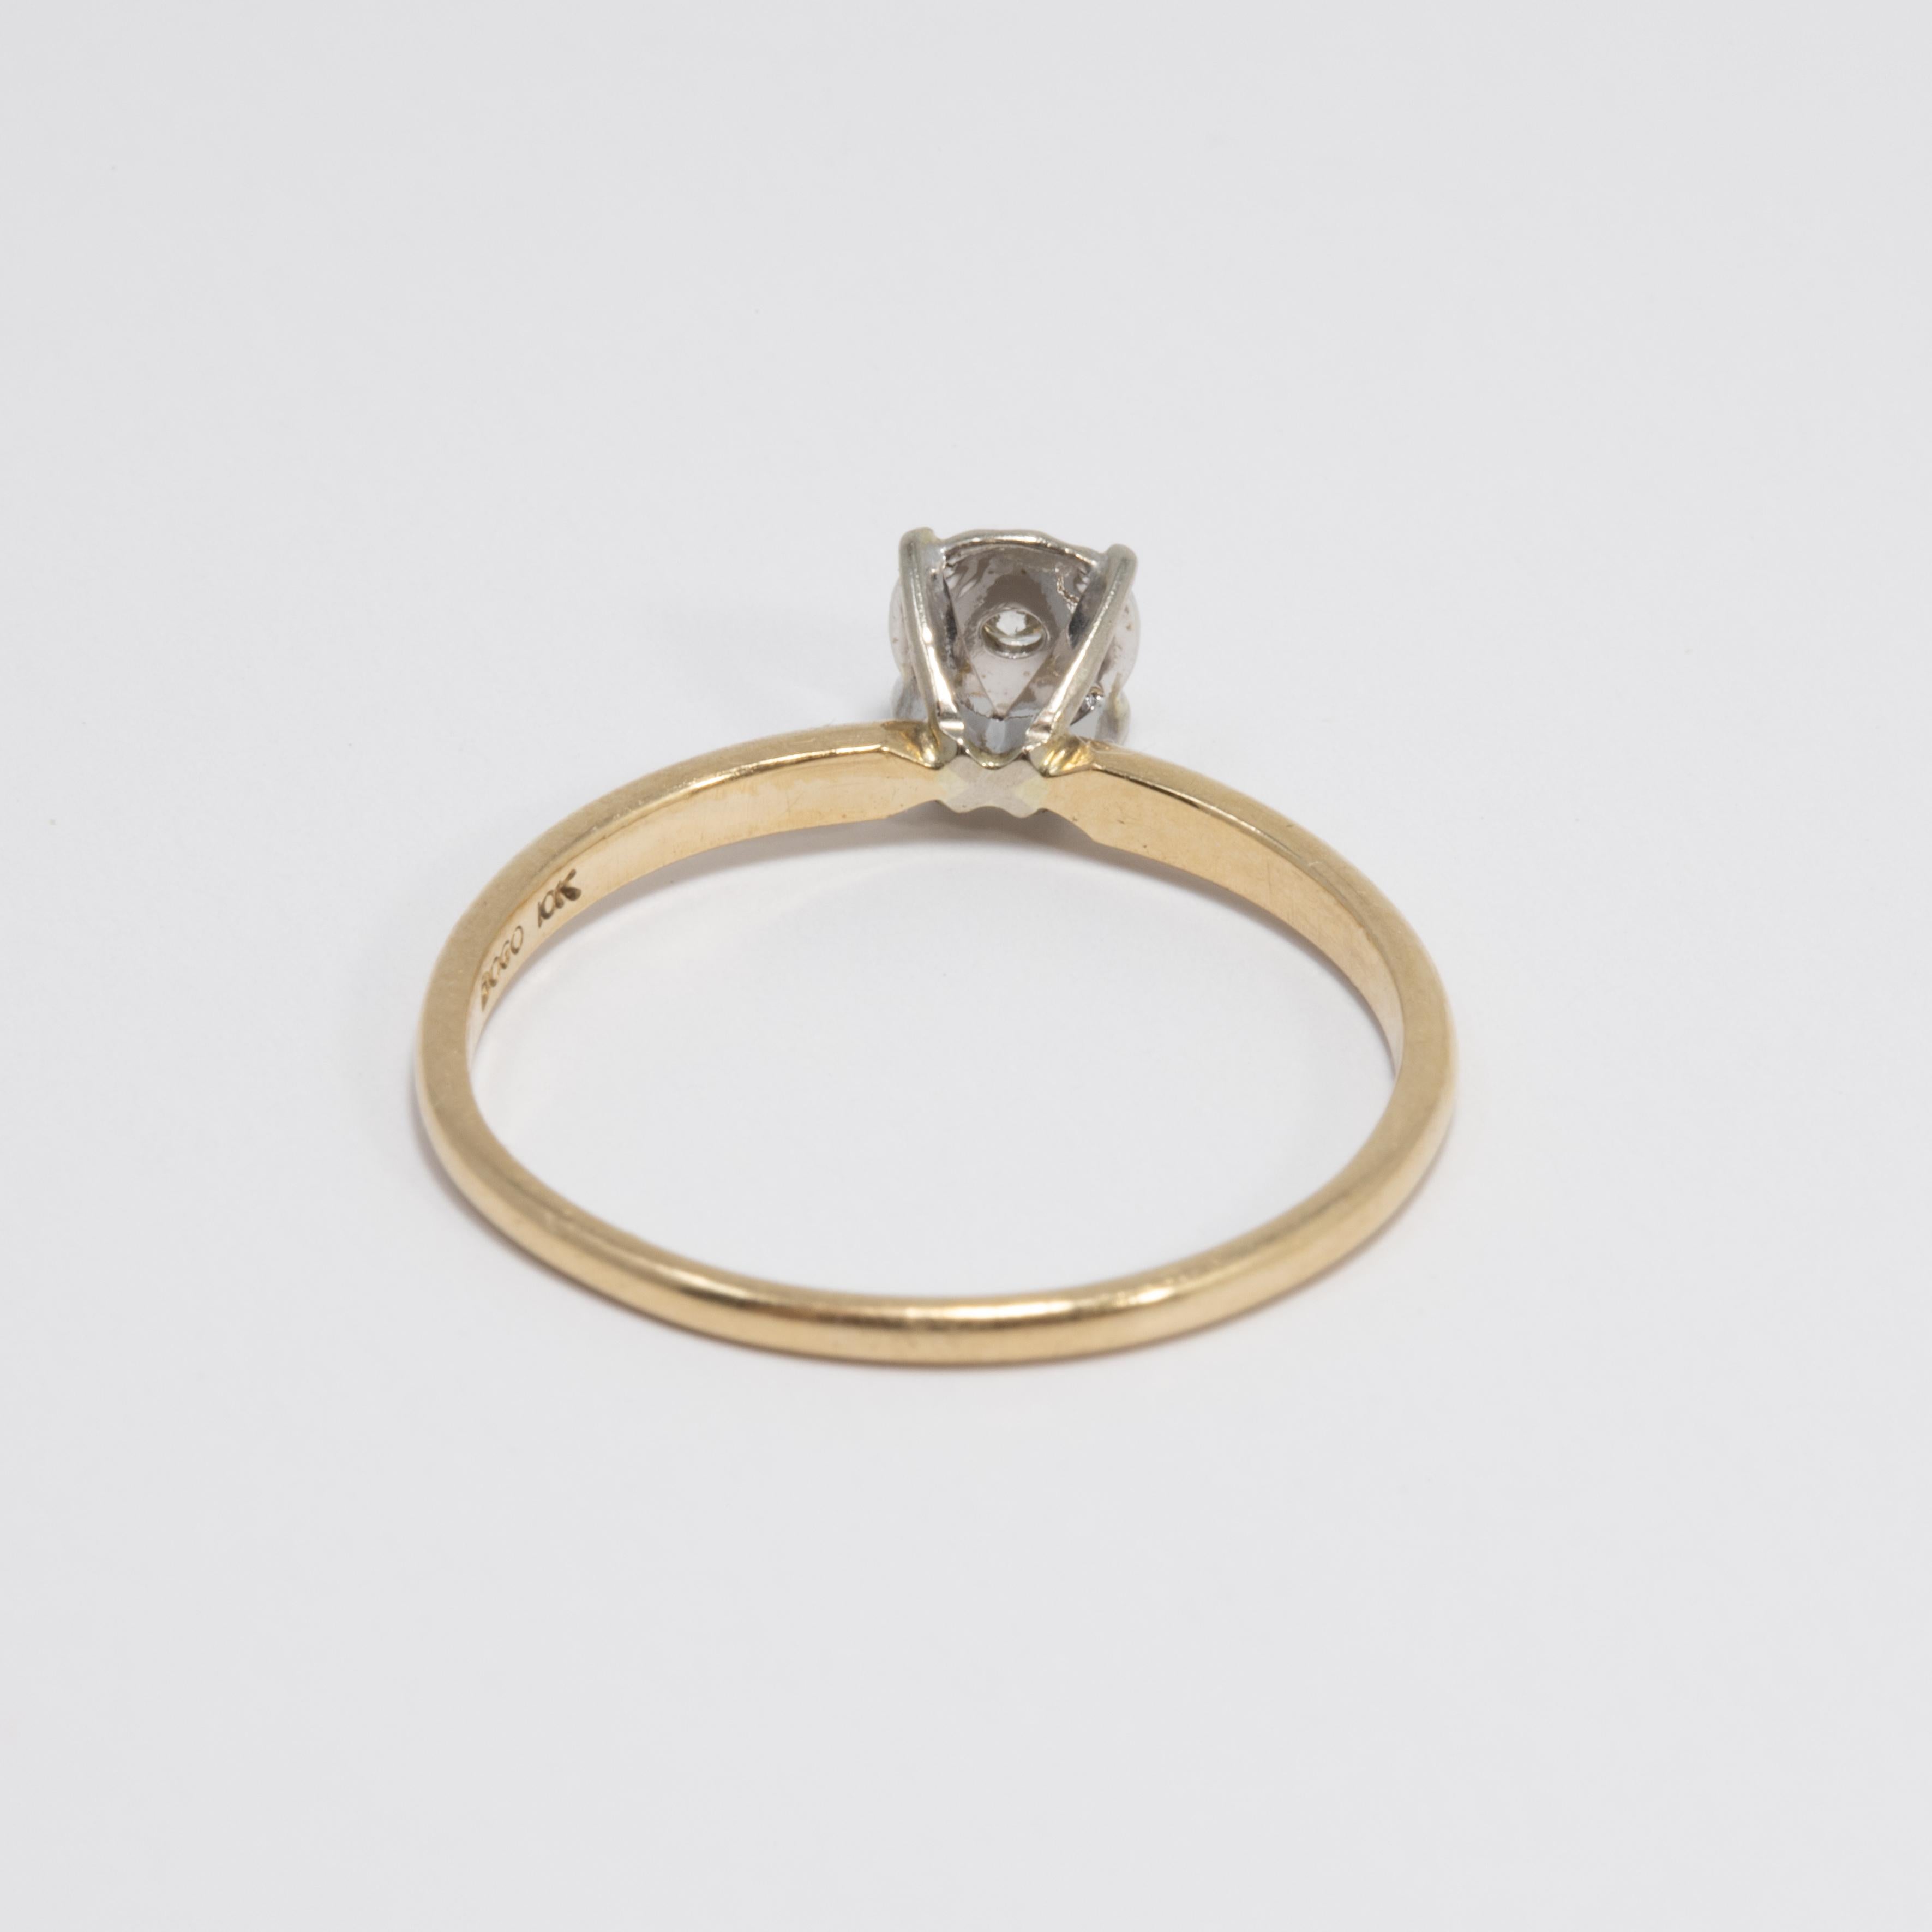 Bogo Diamond 10K Yellow Gold Custom Ring, Solitaire Prong Setting, Round Cut In Good Condition For Sale In Milford, DE